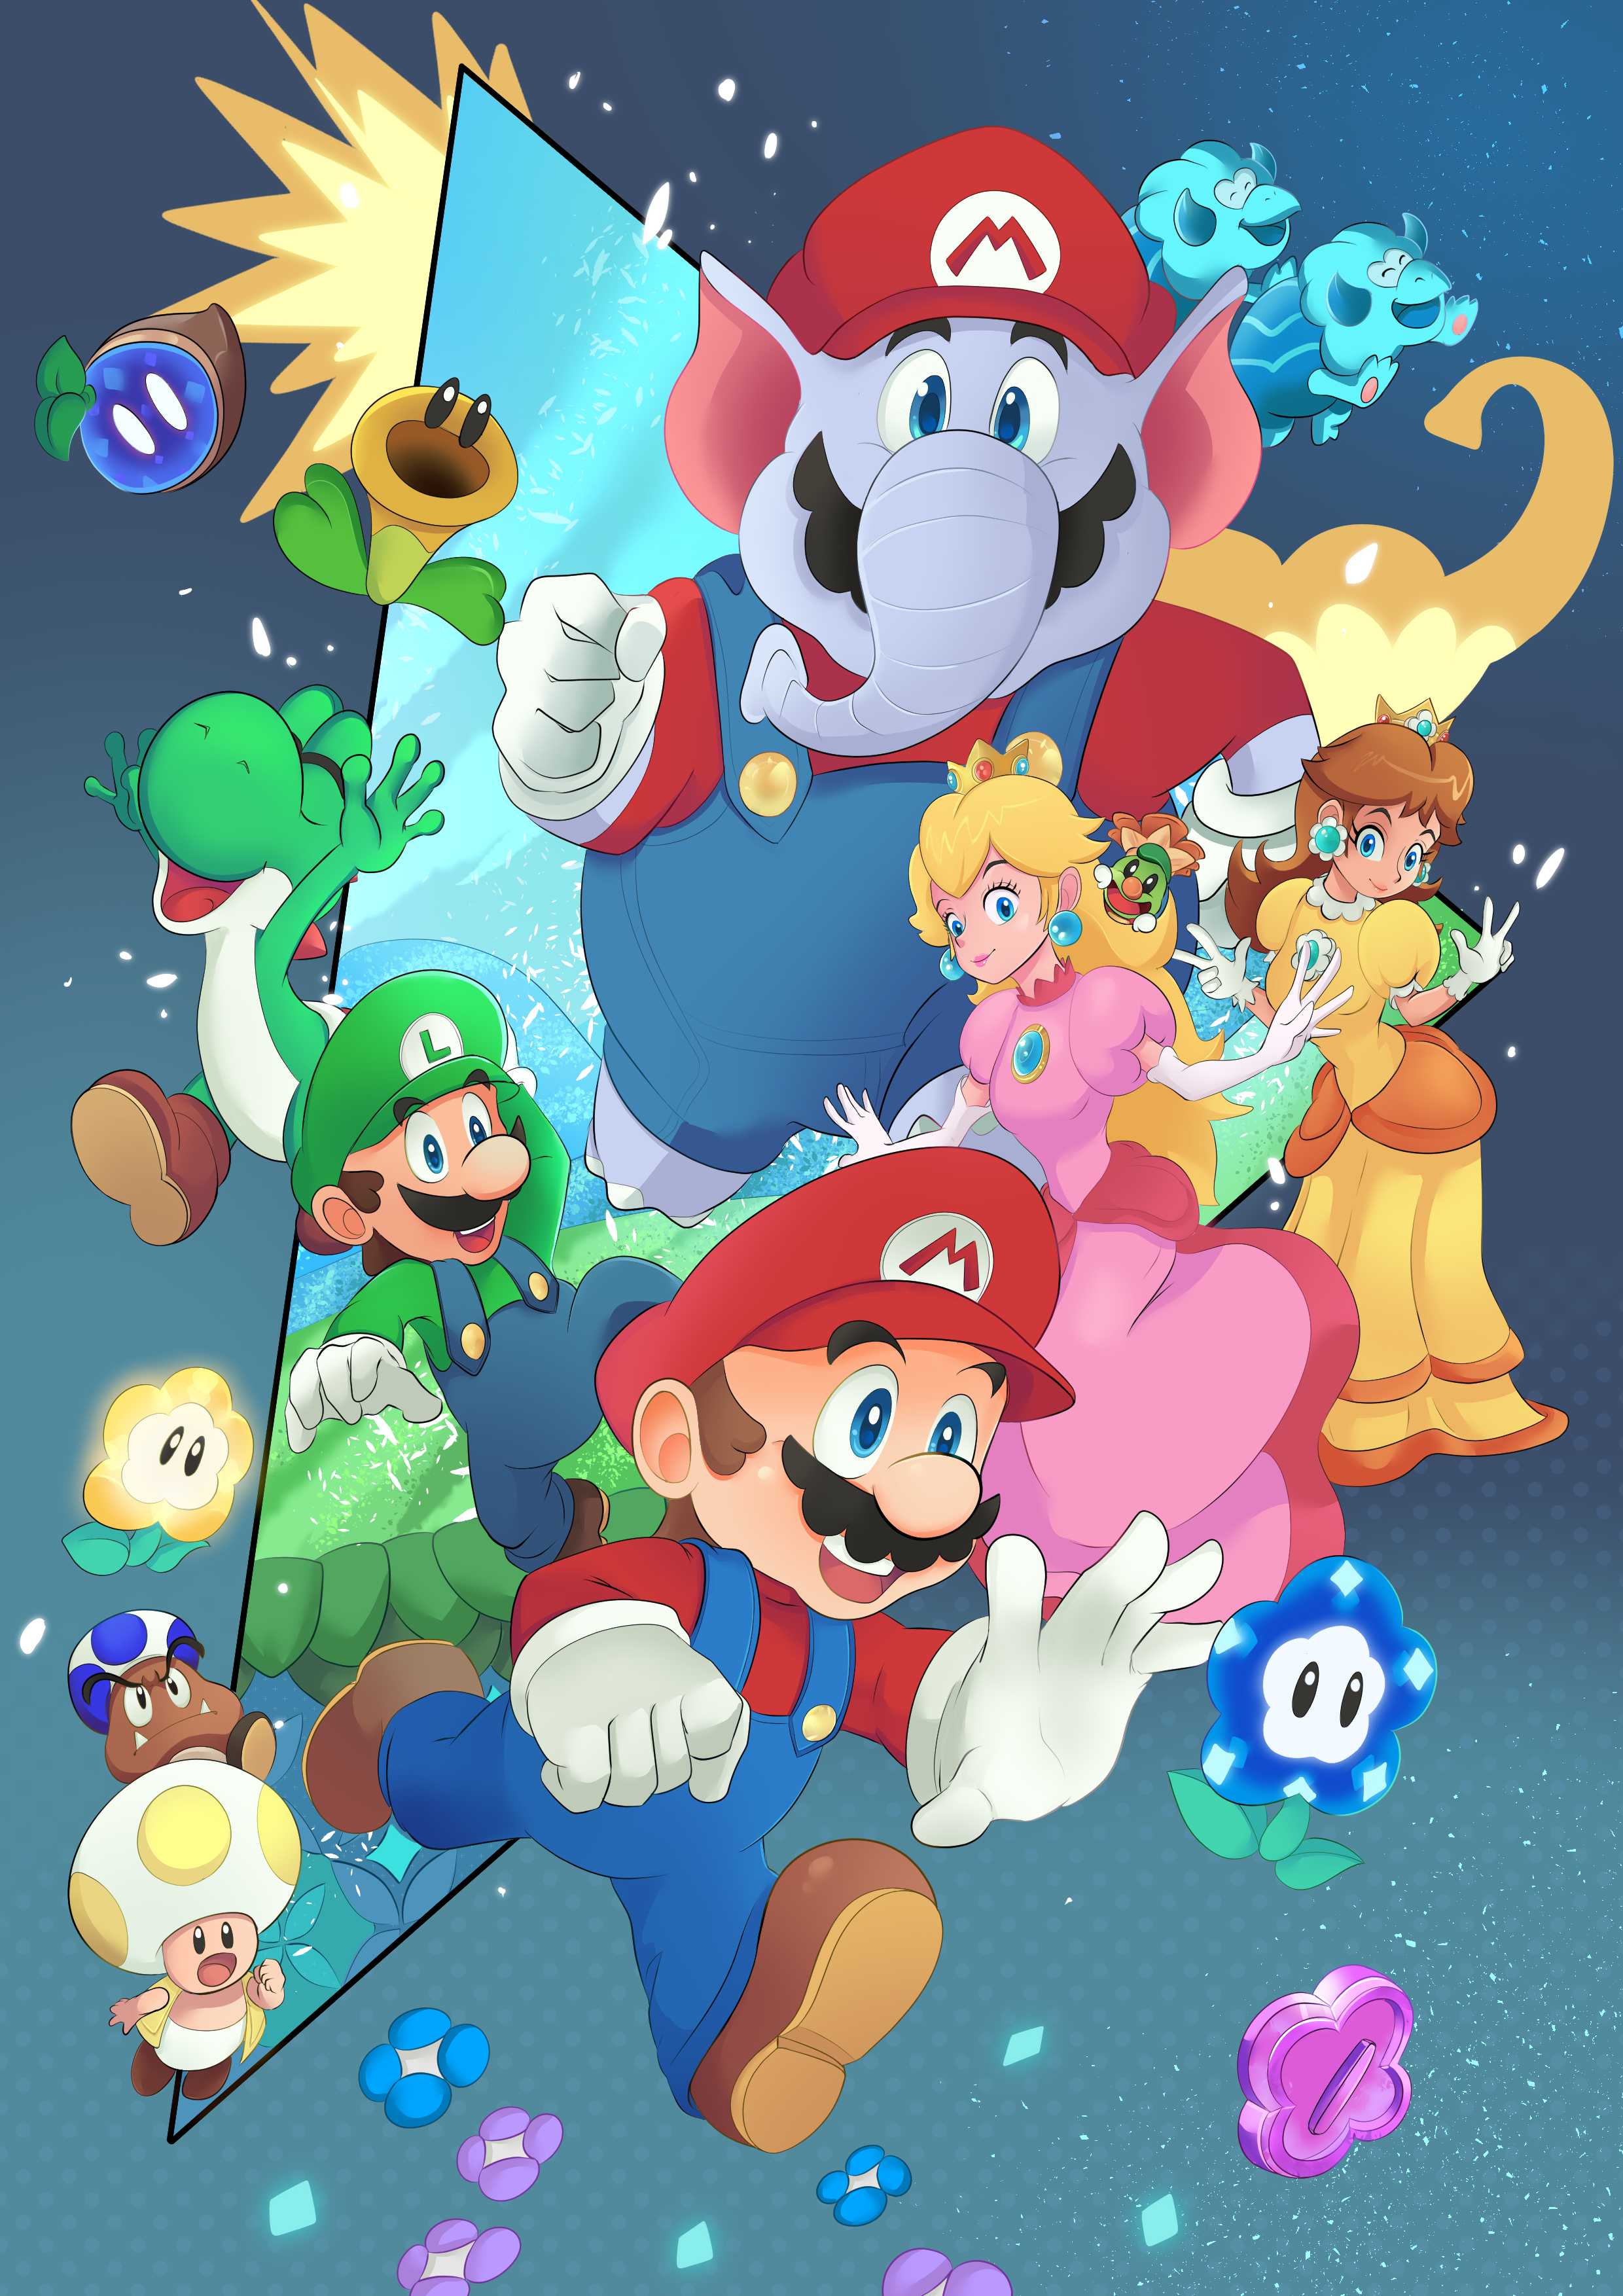 New set of Super Mario Bros. Wonder icons available for Nintendo